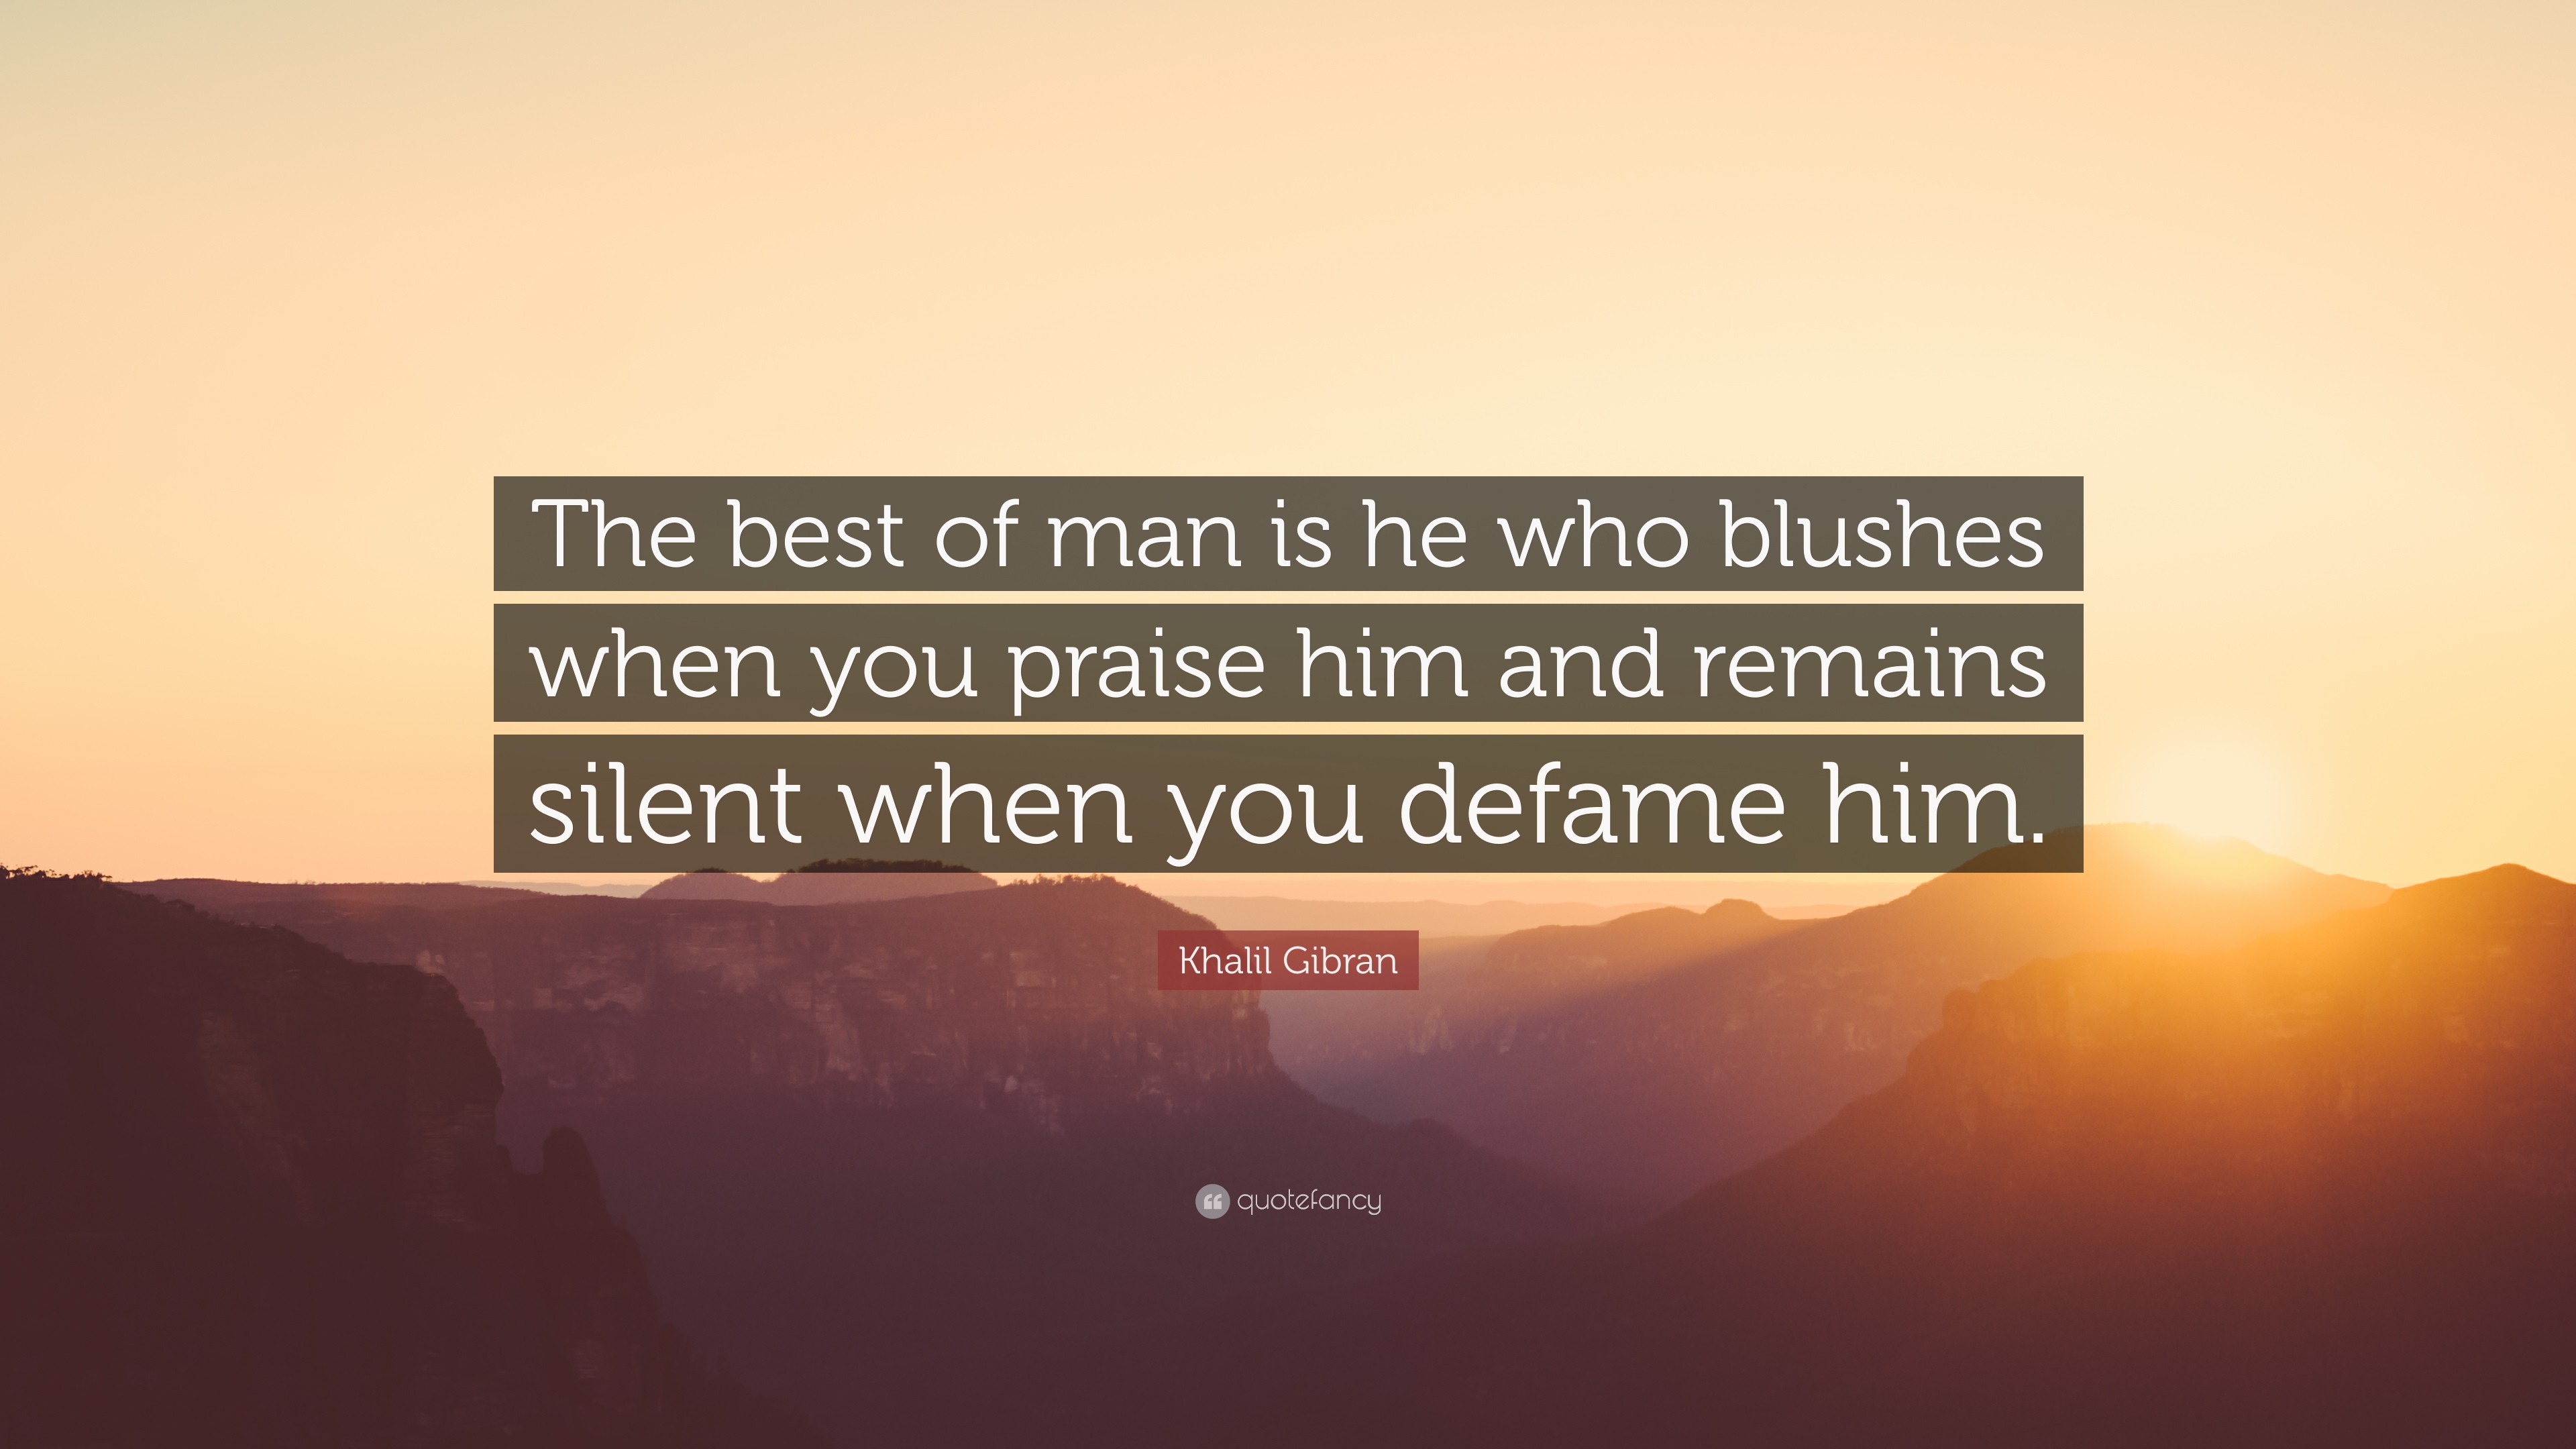 Khalil Gibran Quote: “The best of man is he who blushes when you ...